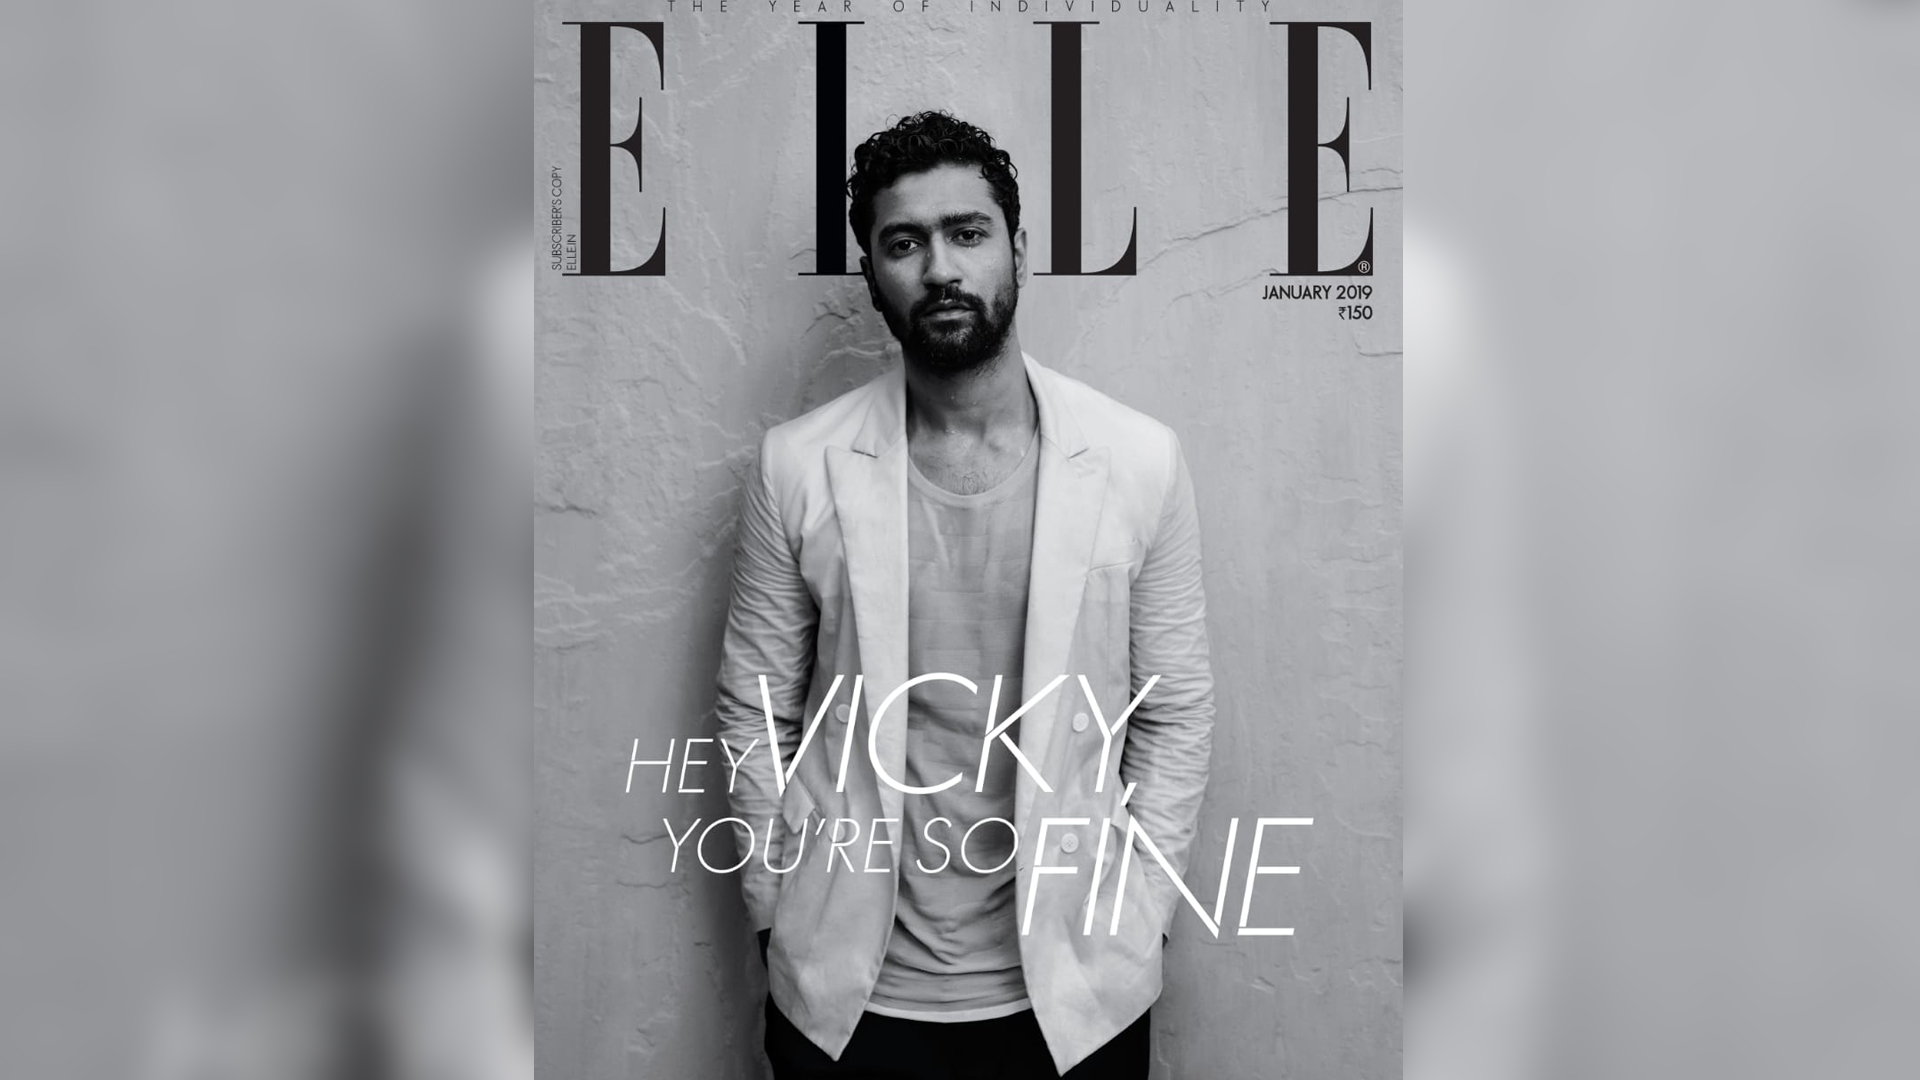 Vicky Kaushal is the first young Bollywood actor to pose solo on the cover of Elle India